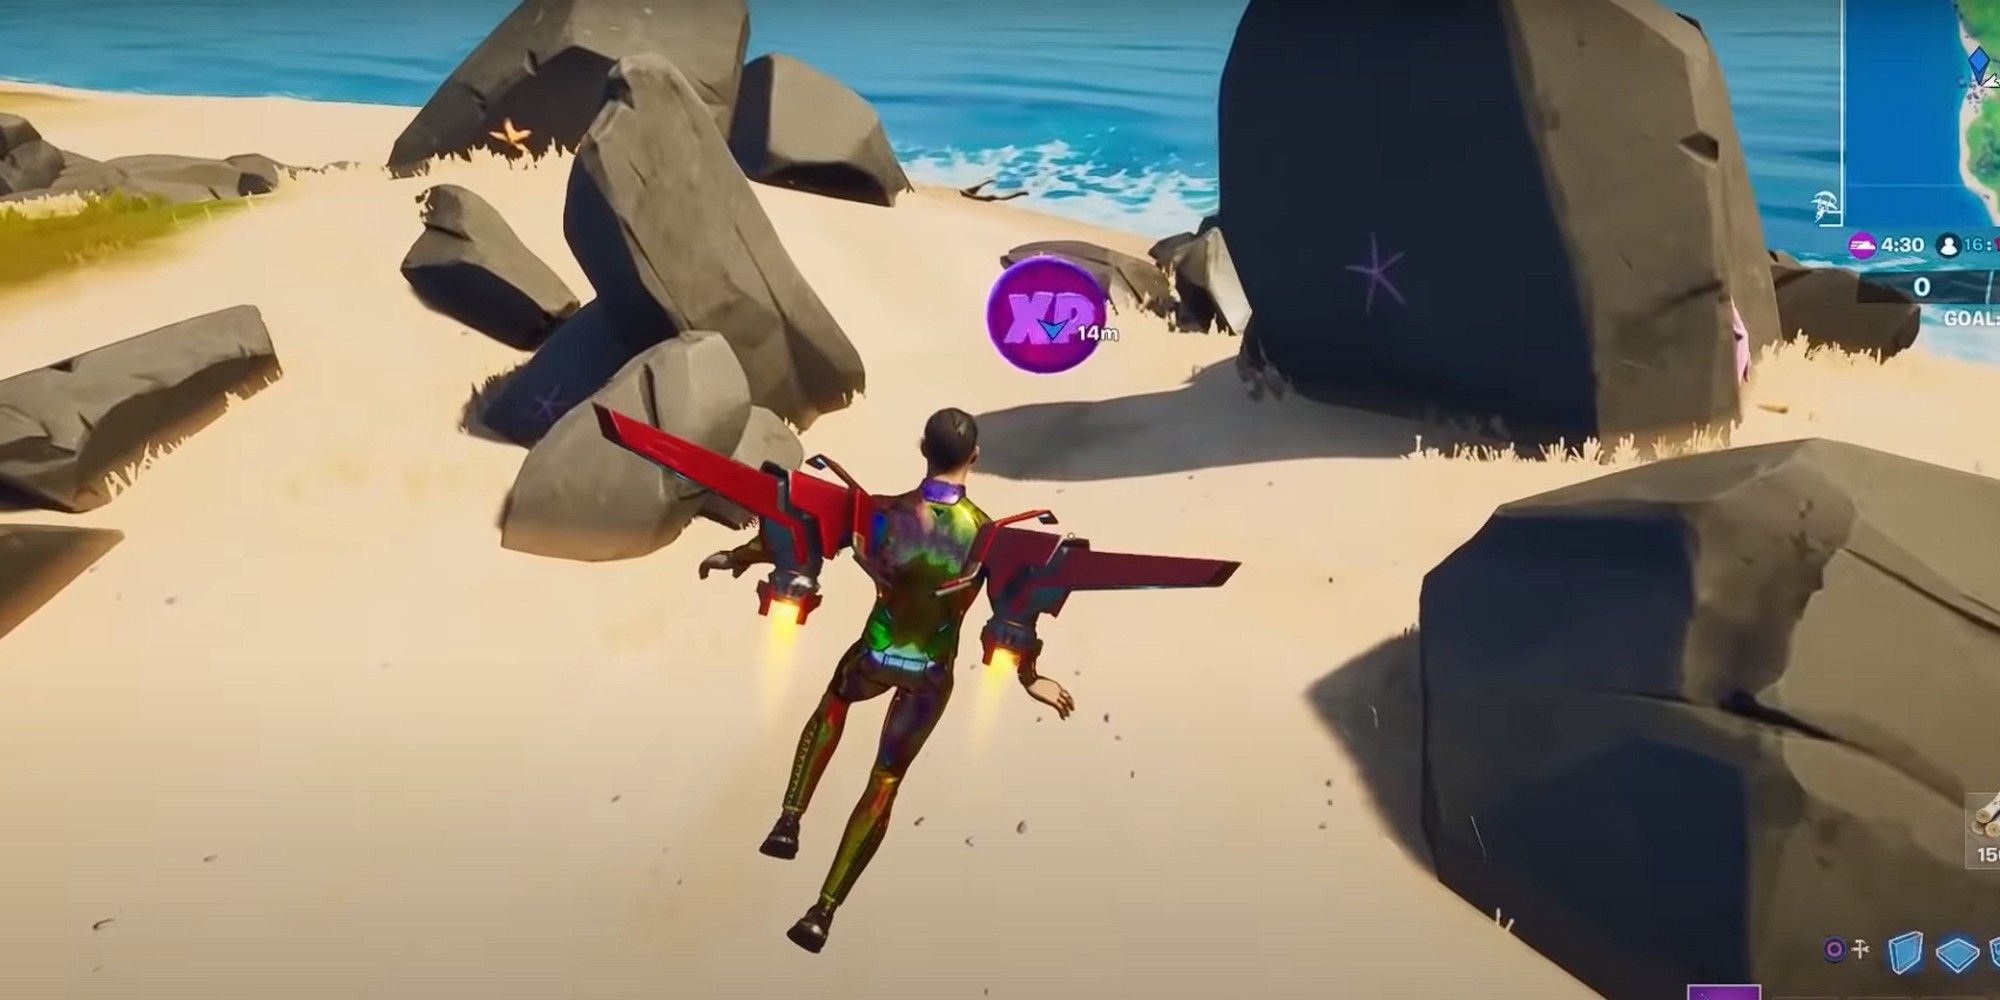 A player lands to grab a Purple XP Coin on a beach in Fortnite